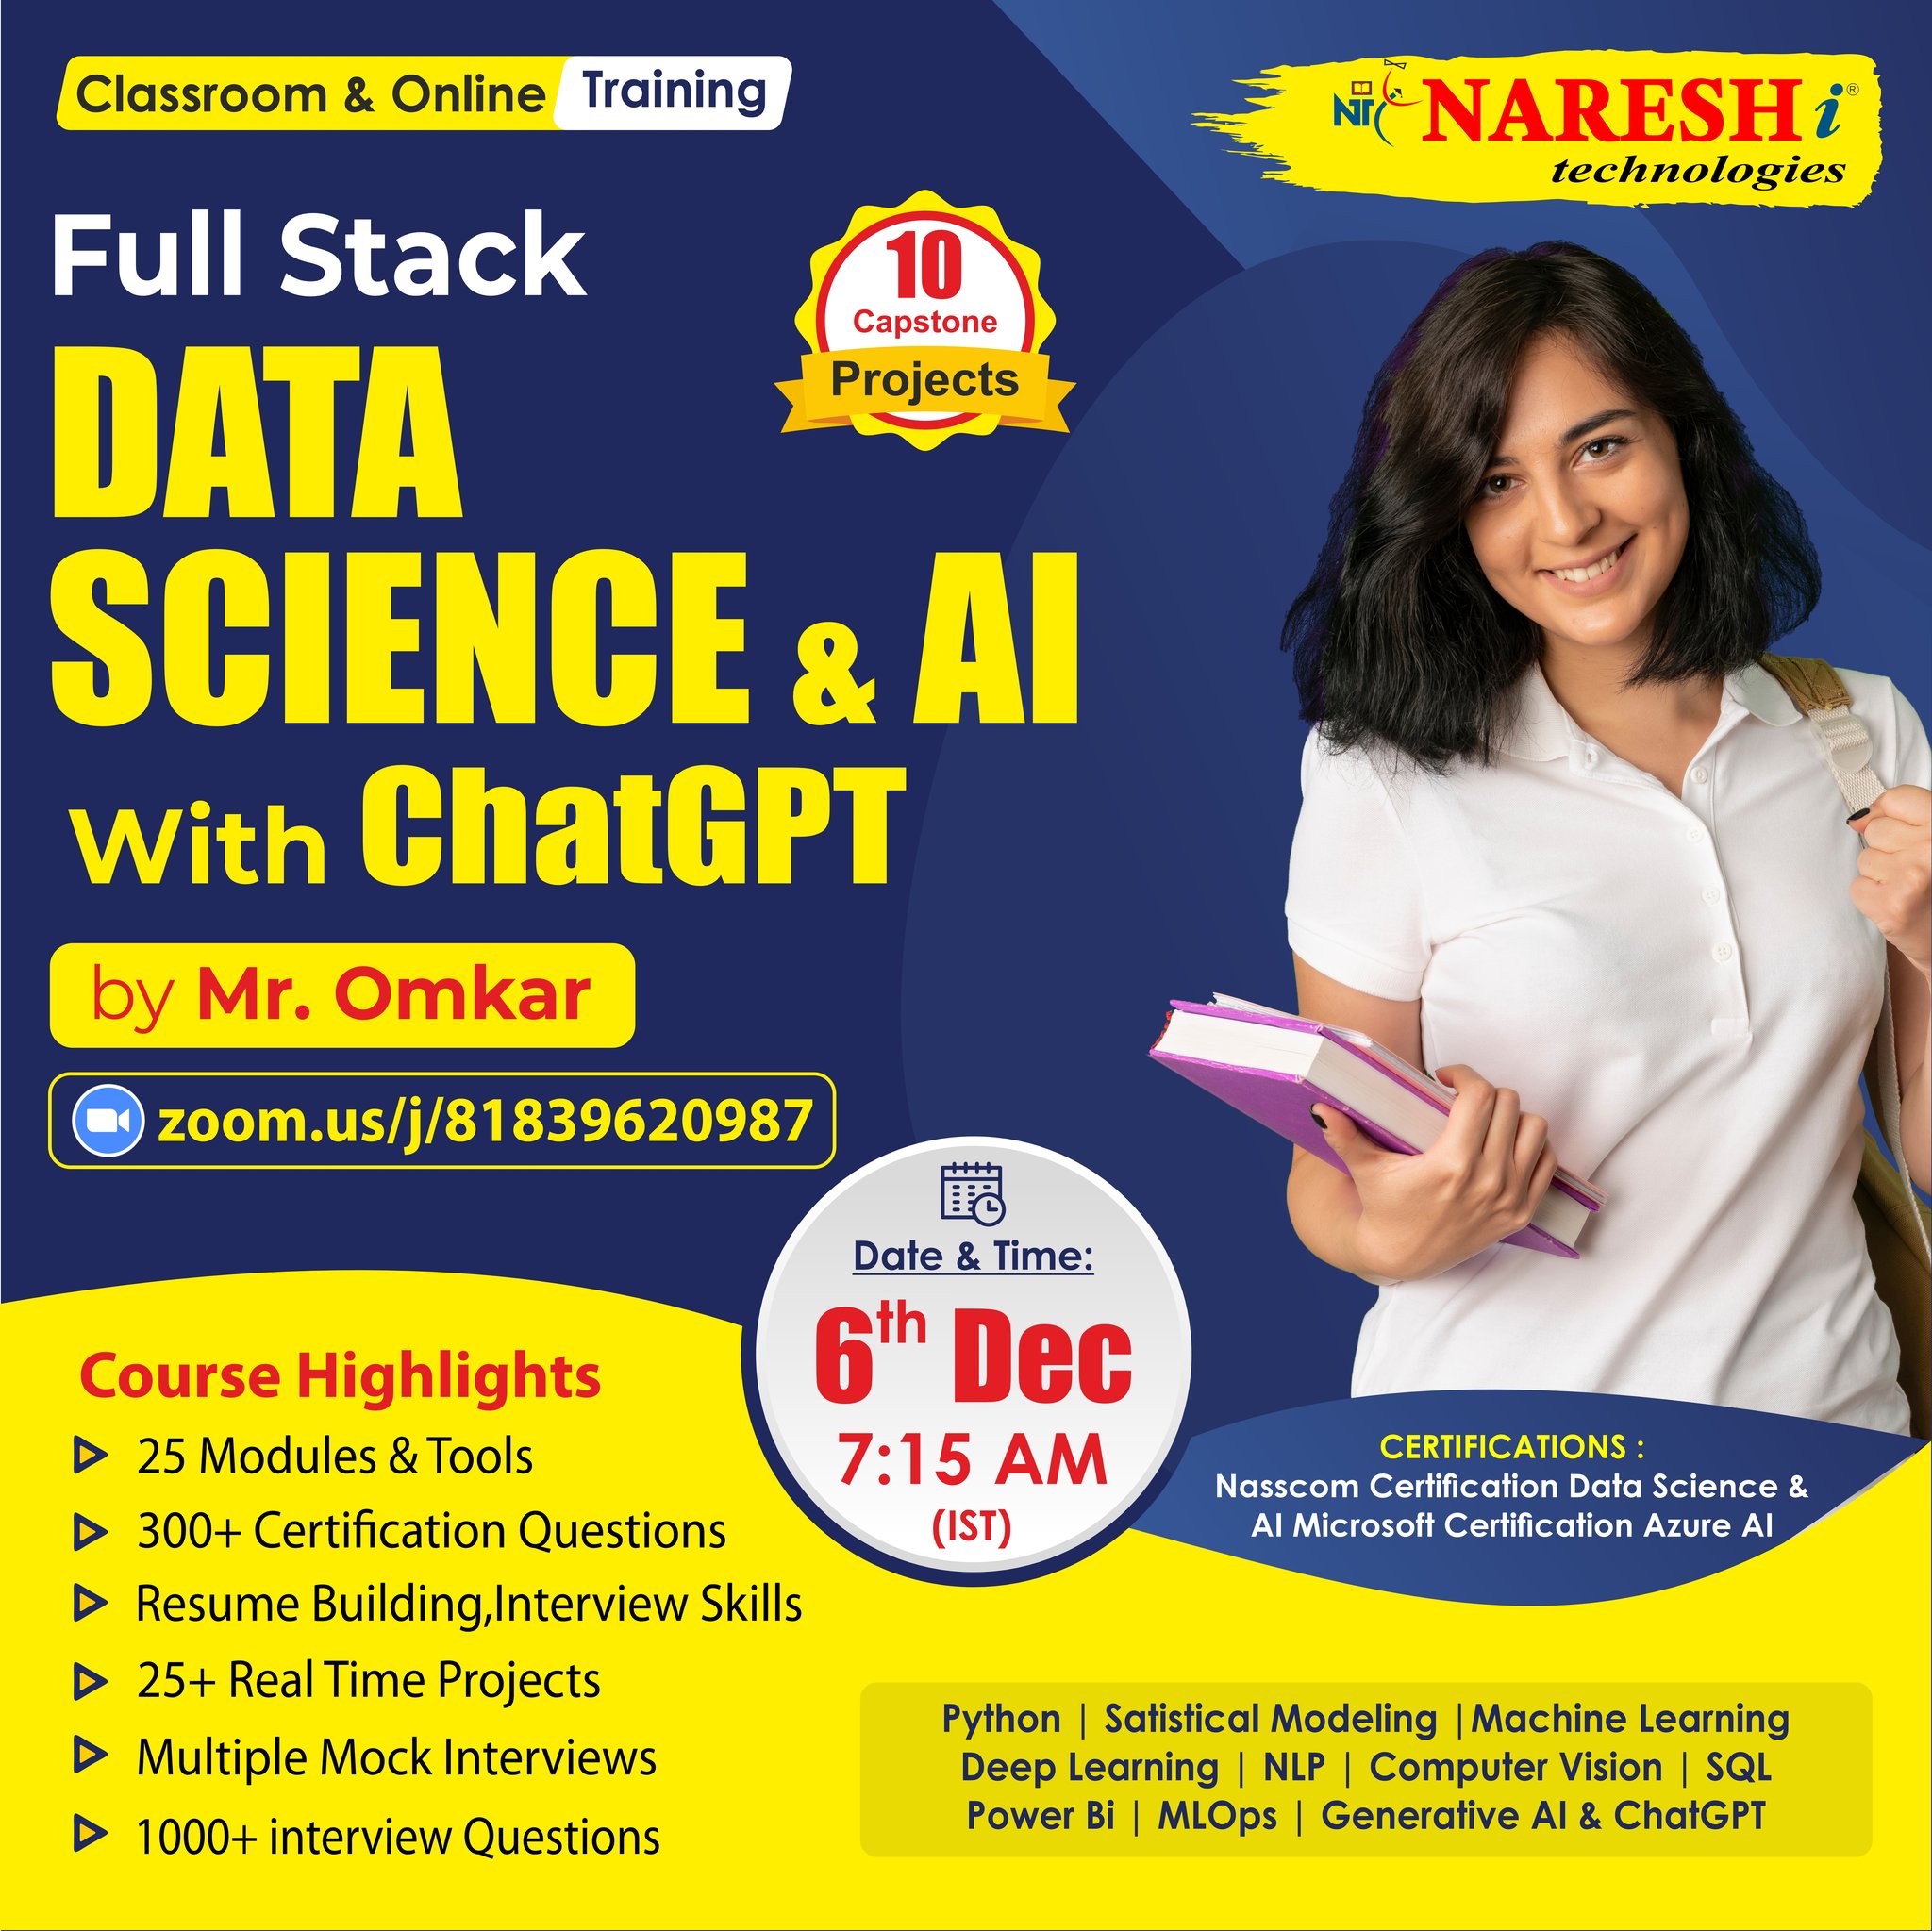 Full Stack Data Science & AI  by Mr. Omkar in NareshIT - 91-8179191999, Online Event